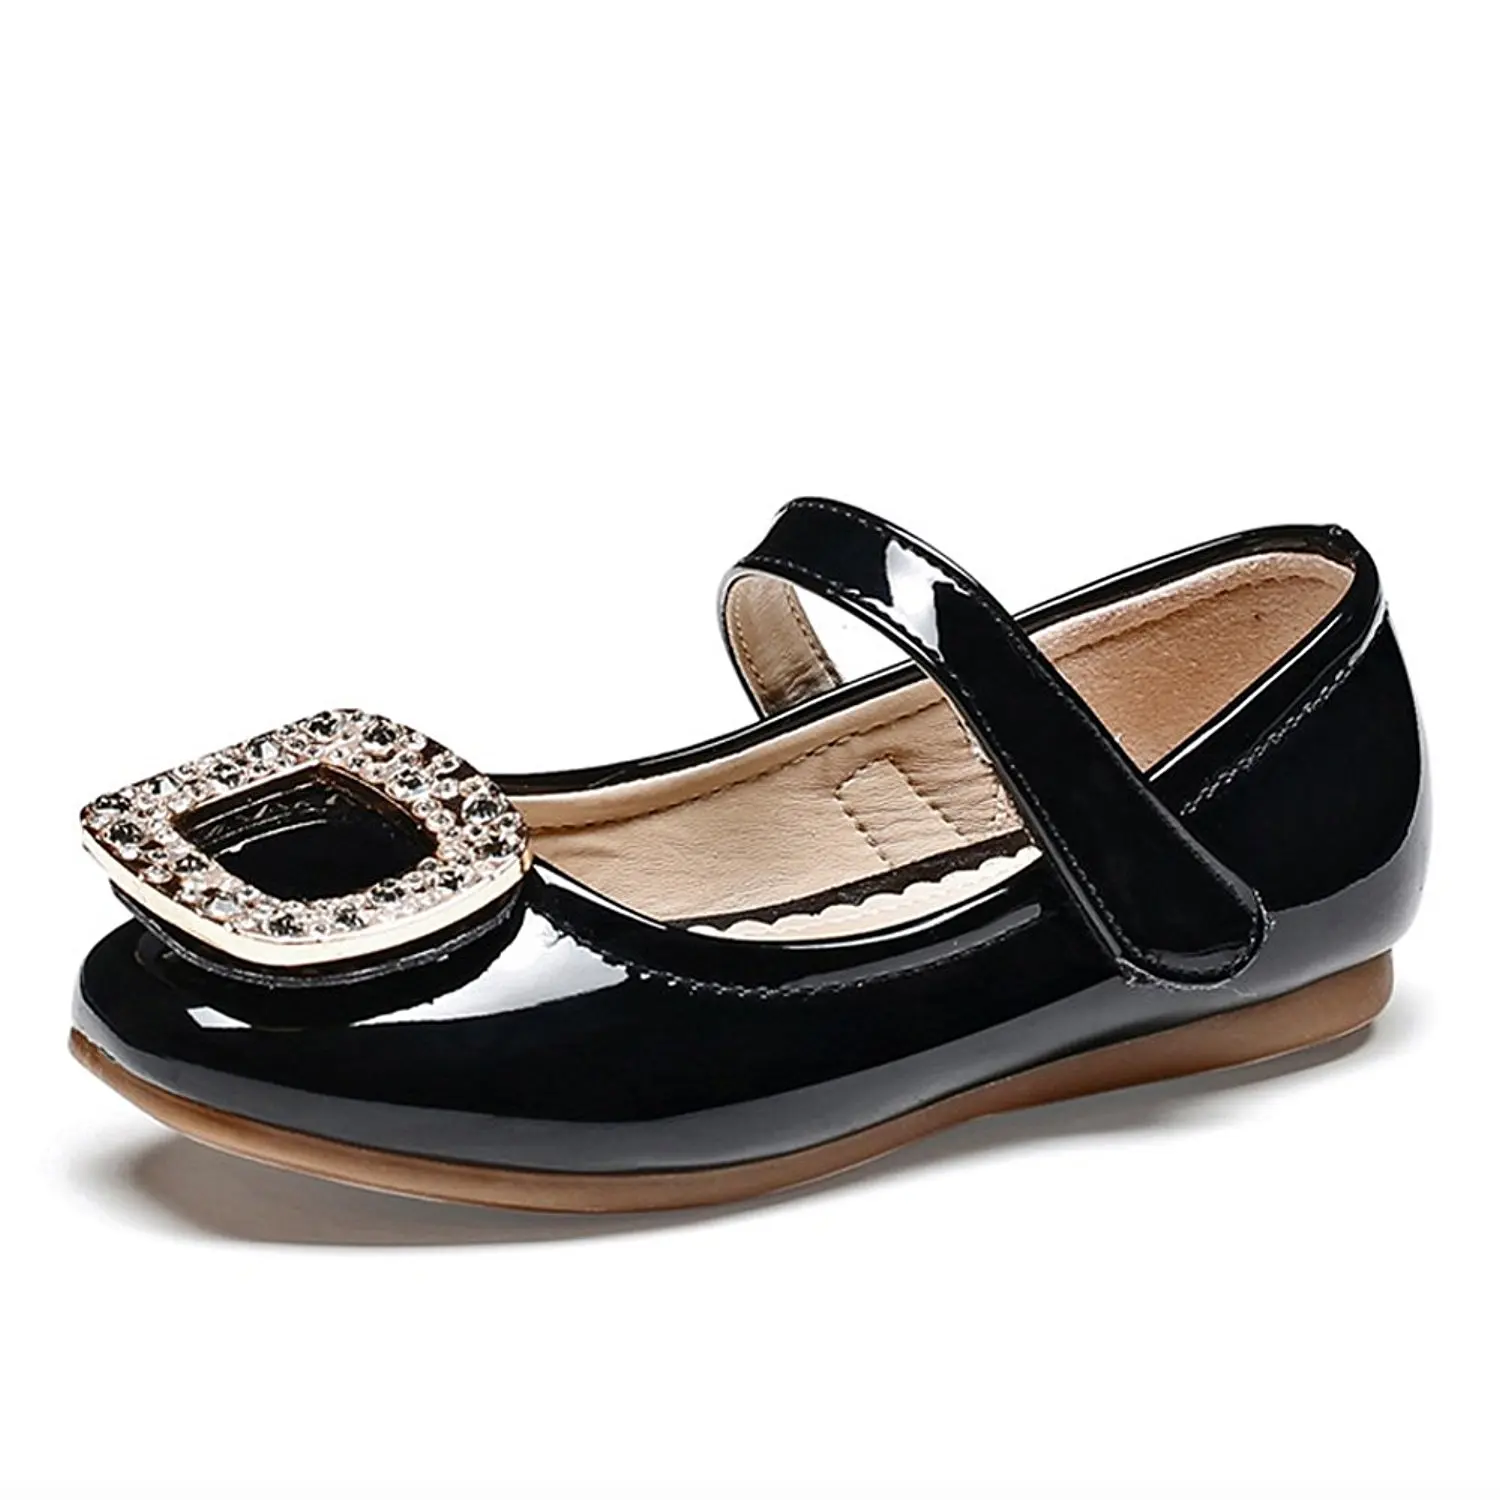 Cheap Black Patent Leather Mary Jane Flats, find Black Patent Leather ...